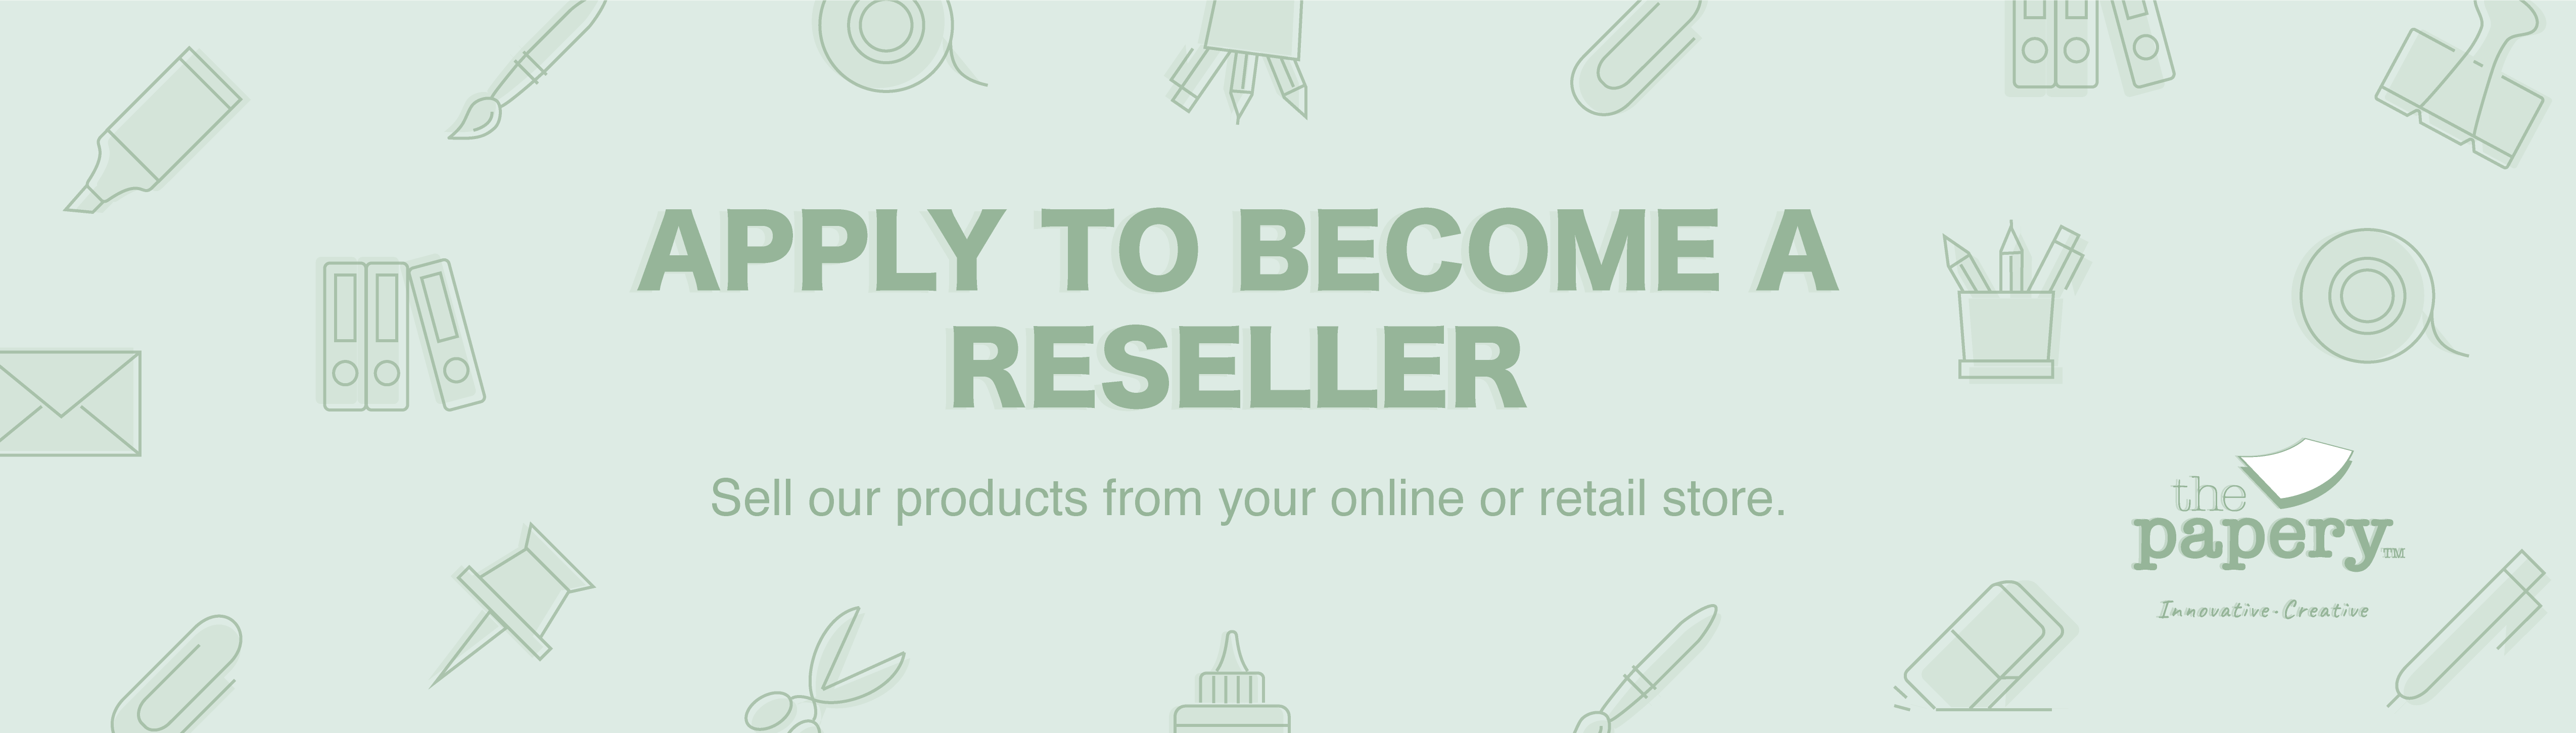 Image shows a banner stating "apply to become a reseller"